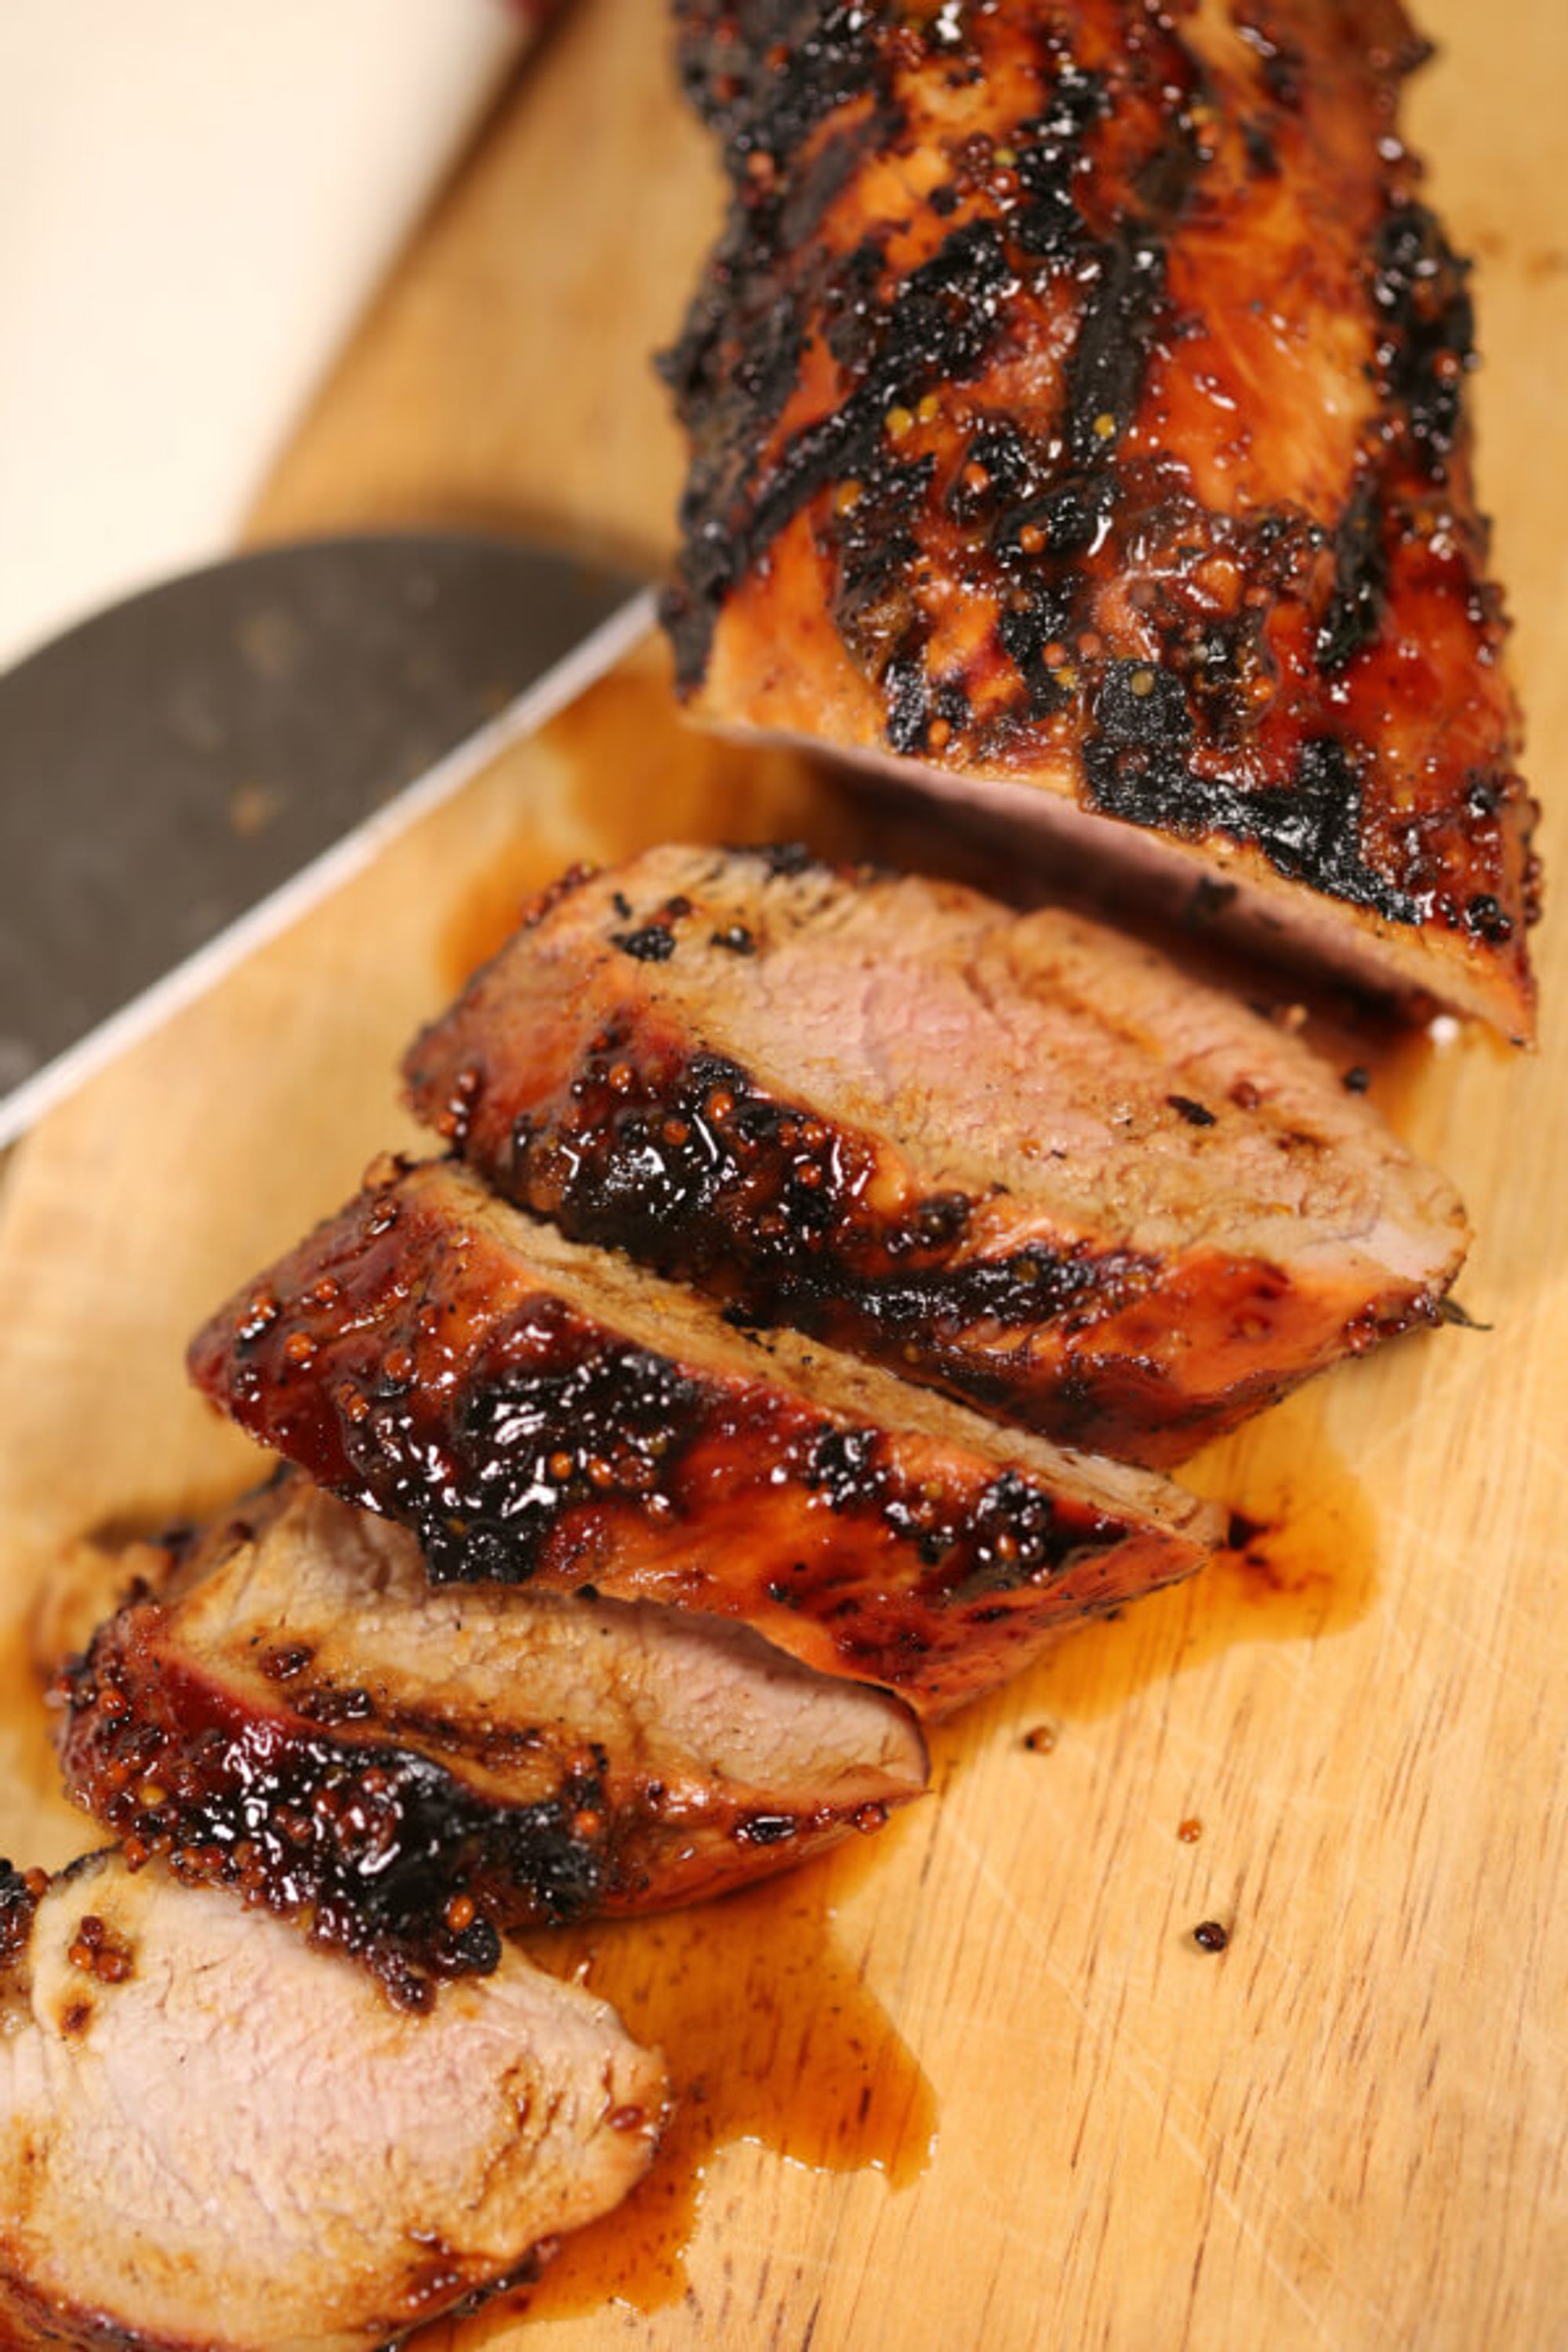 Best Grilled Pork Tenderloin | Quick and Easy Grilled Recipe - My